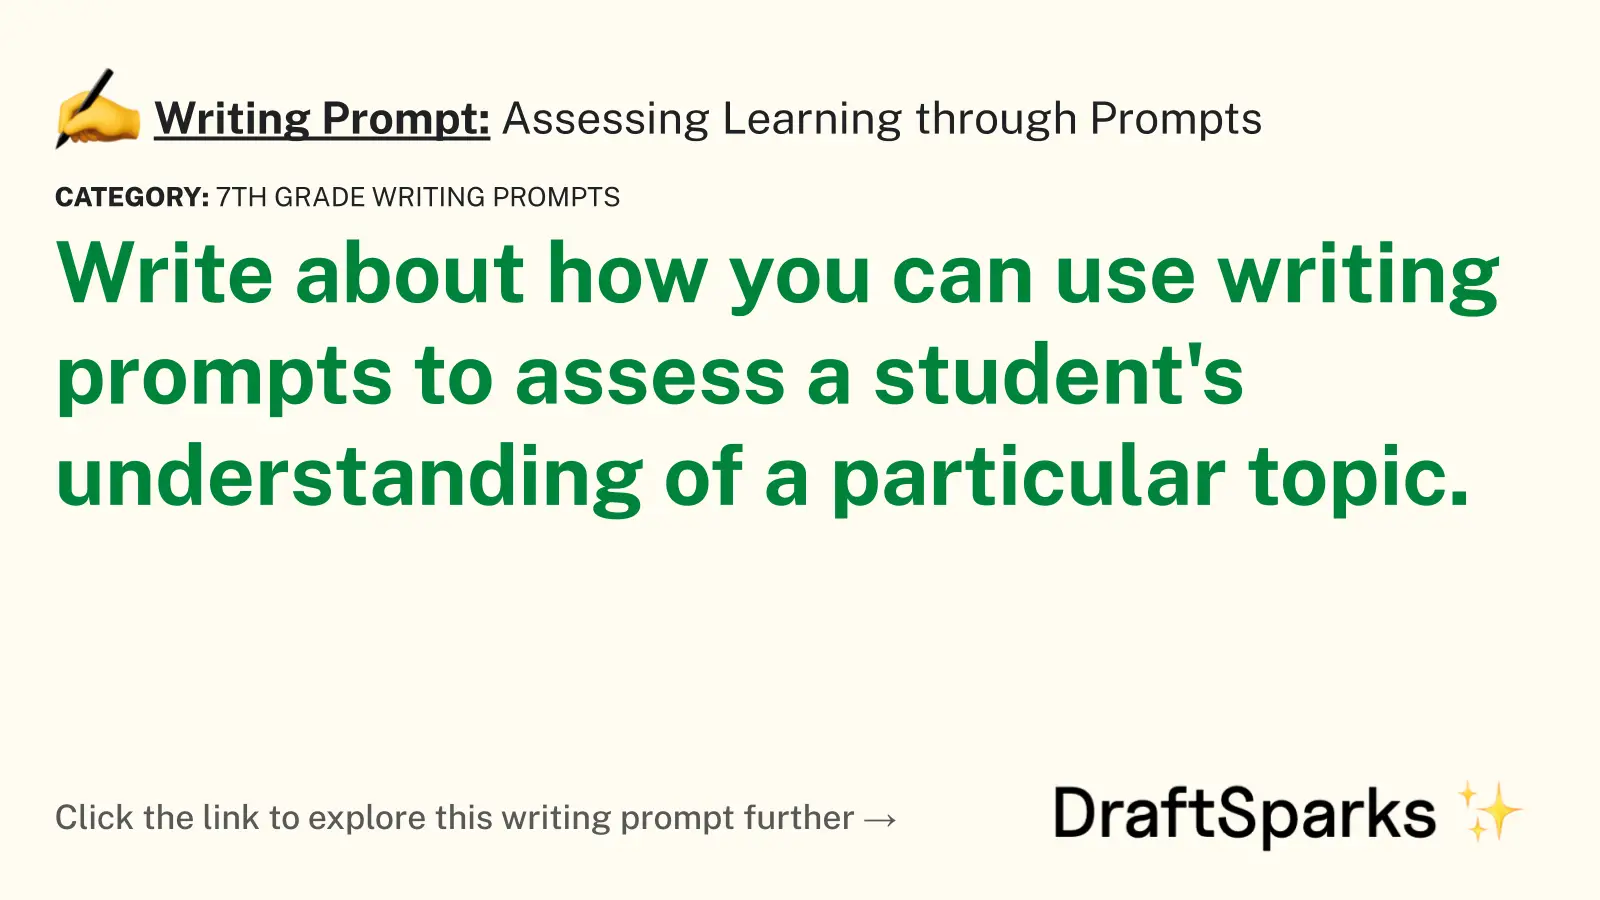 Assessing Learning through Prompts